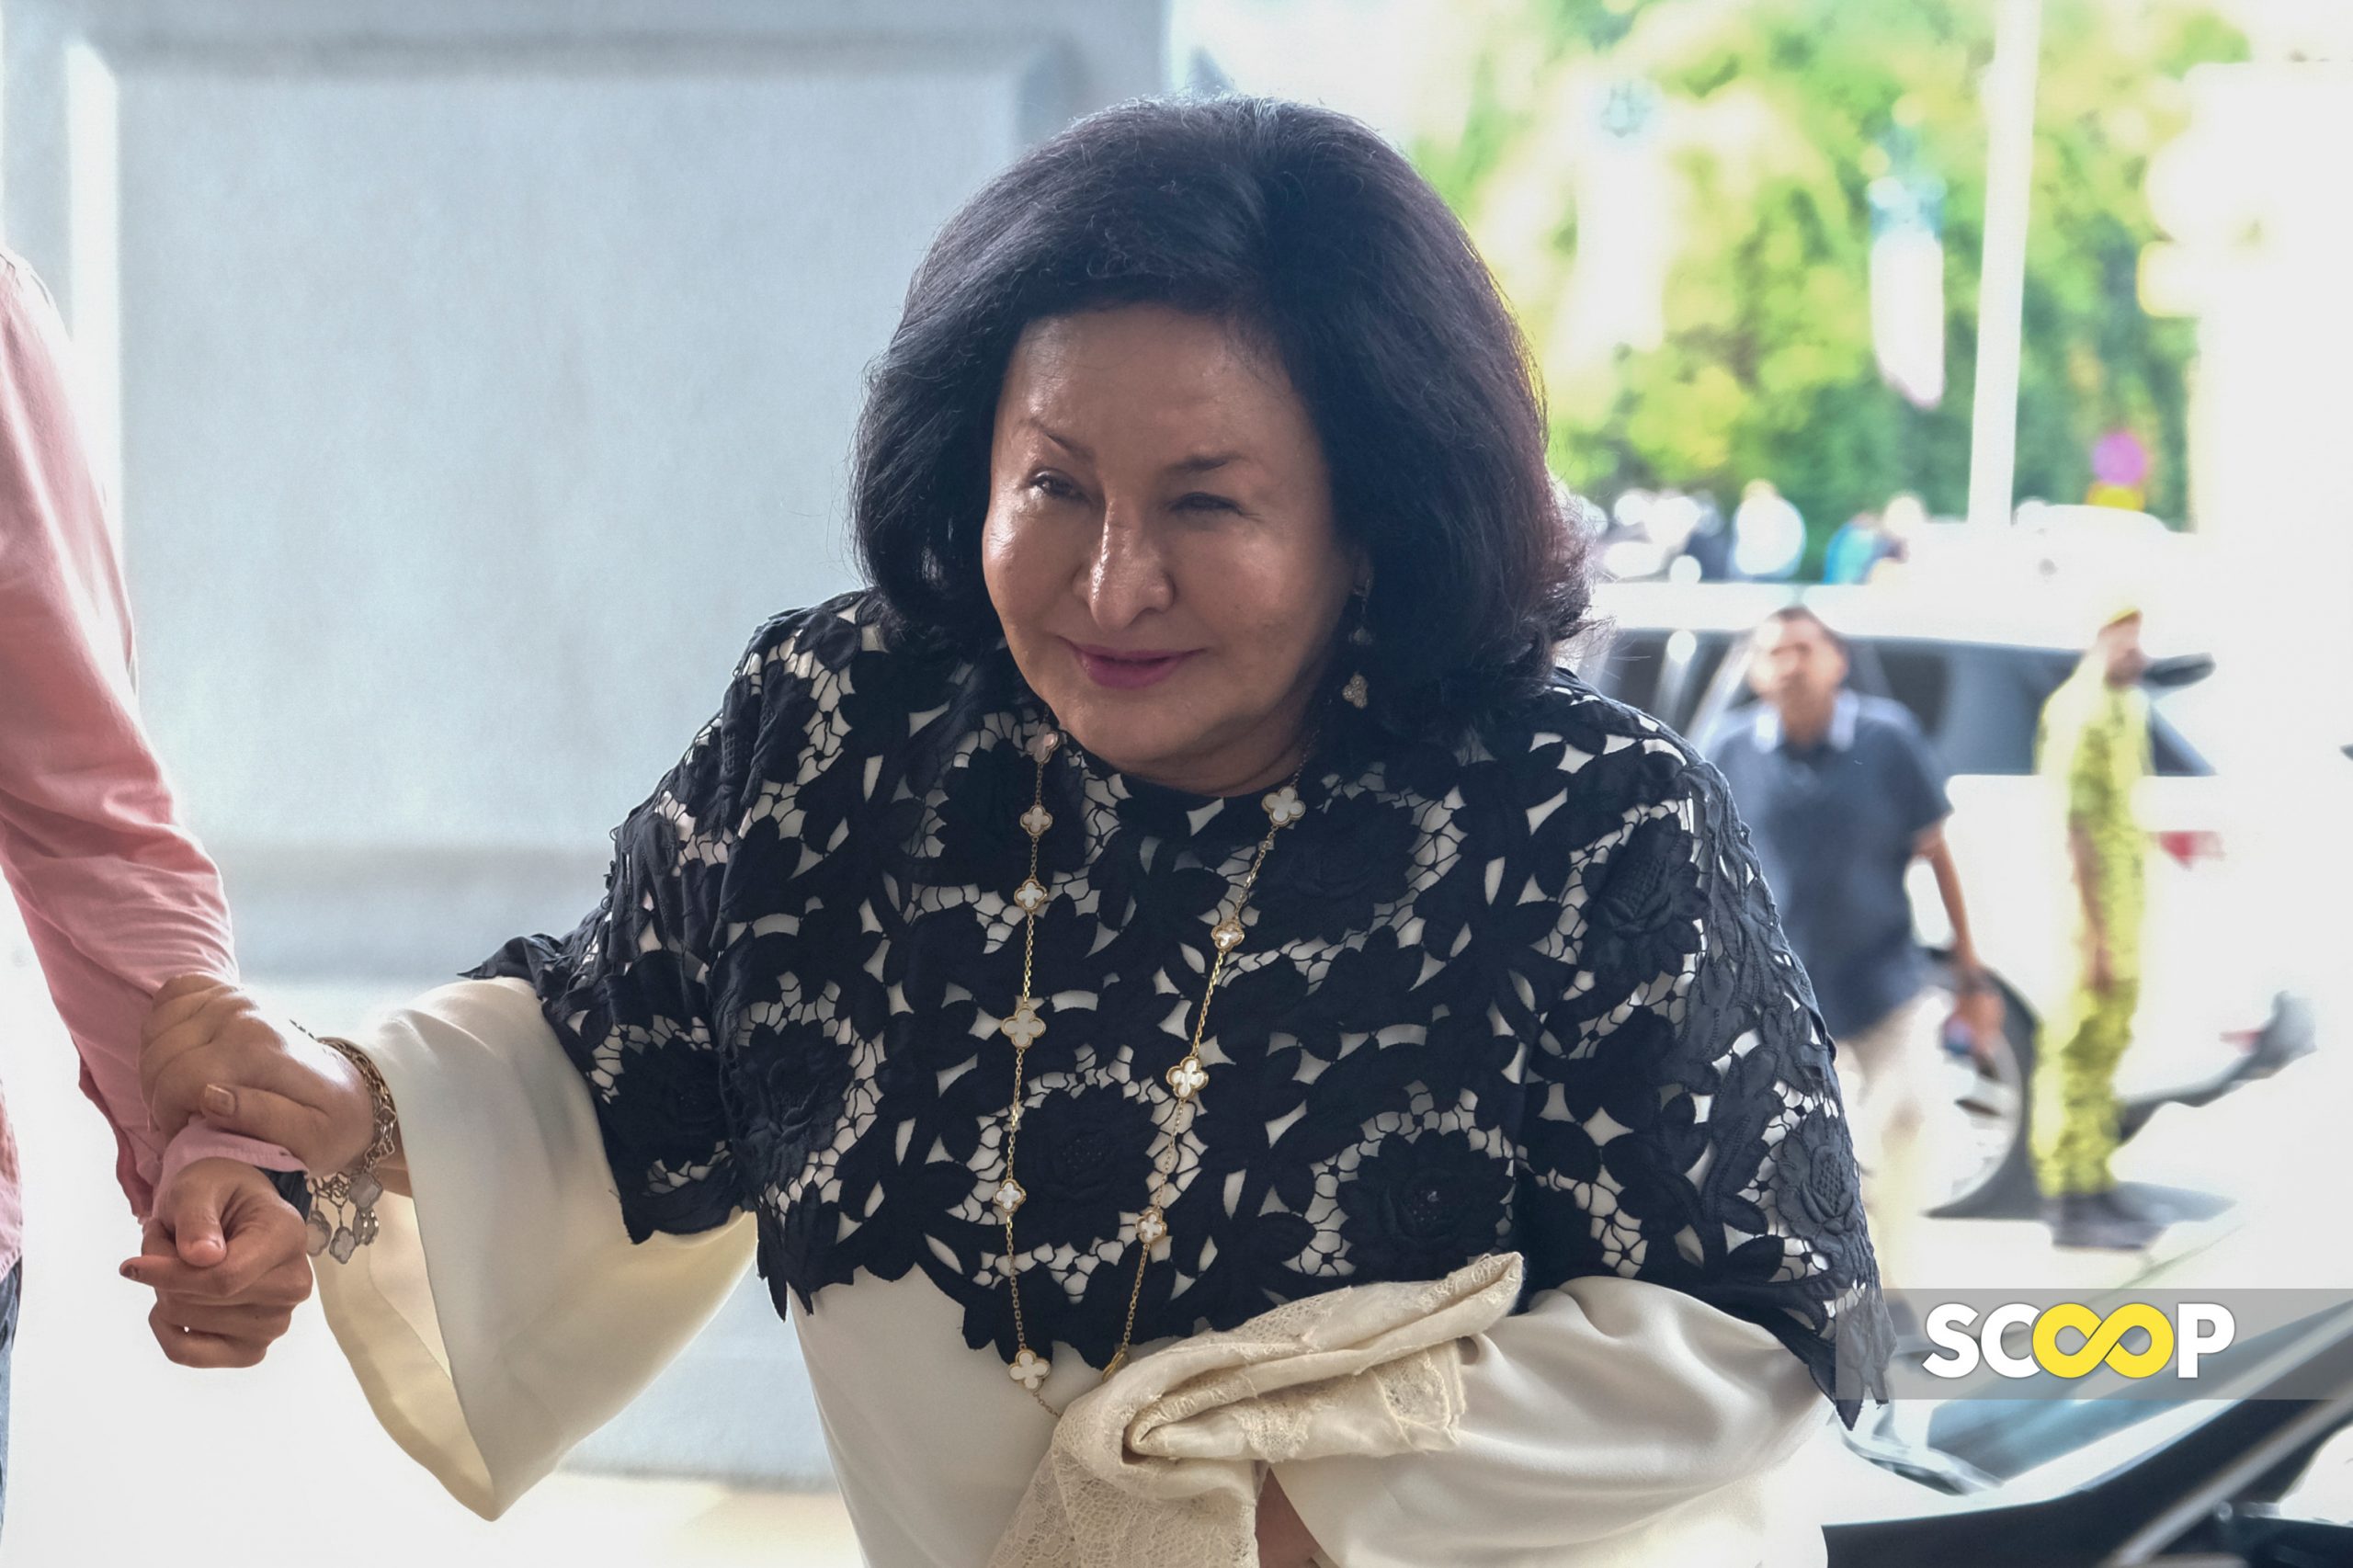 1MDB, 10 entities haul Rosmah, accomplice to court over fraudulent purchase of RM1.65 bil in ‘luxury goods’